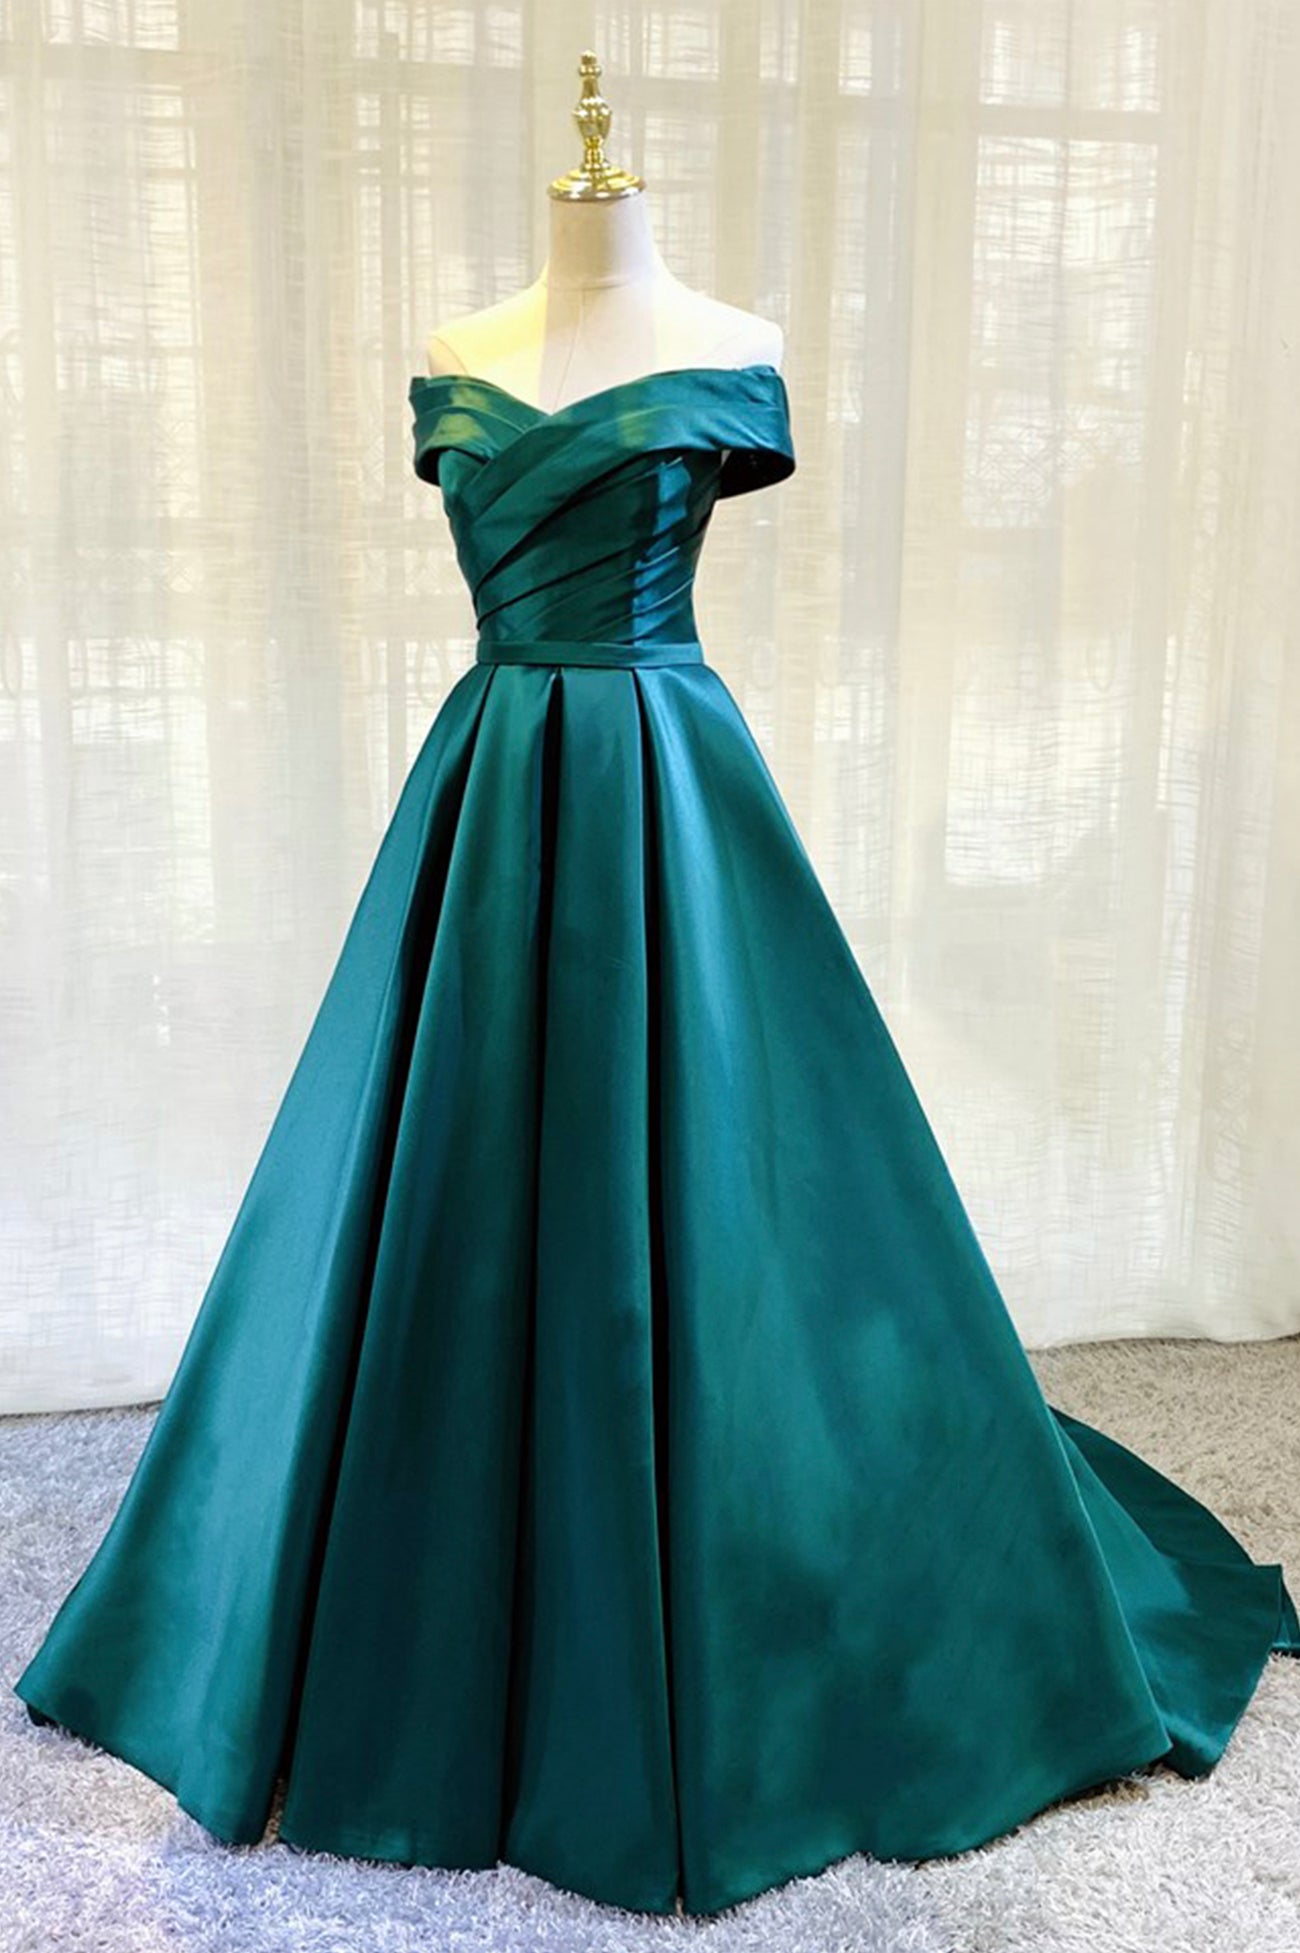 Green Satin Long A-Line Prom Dress, Simple Off the Shoulder Evening Dress